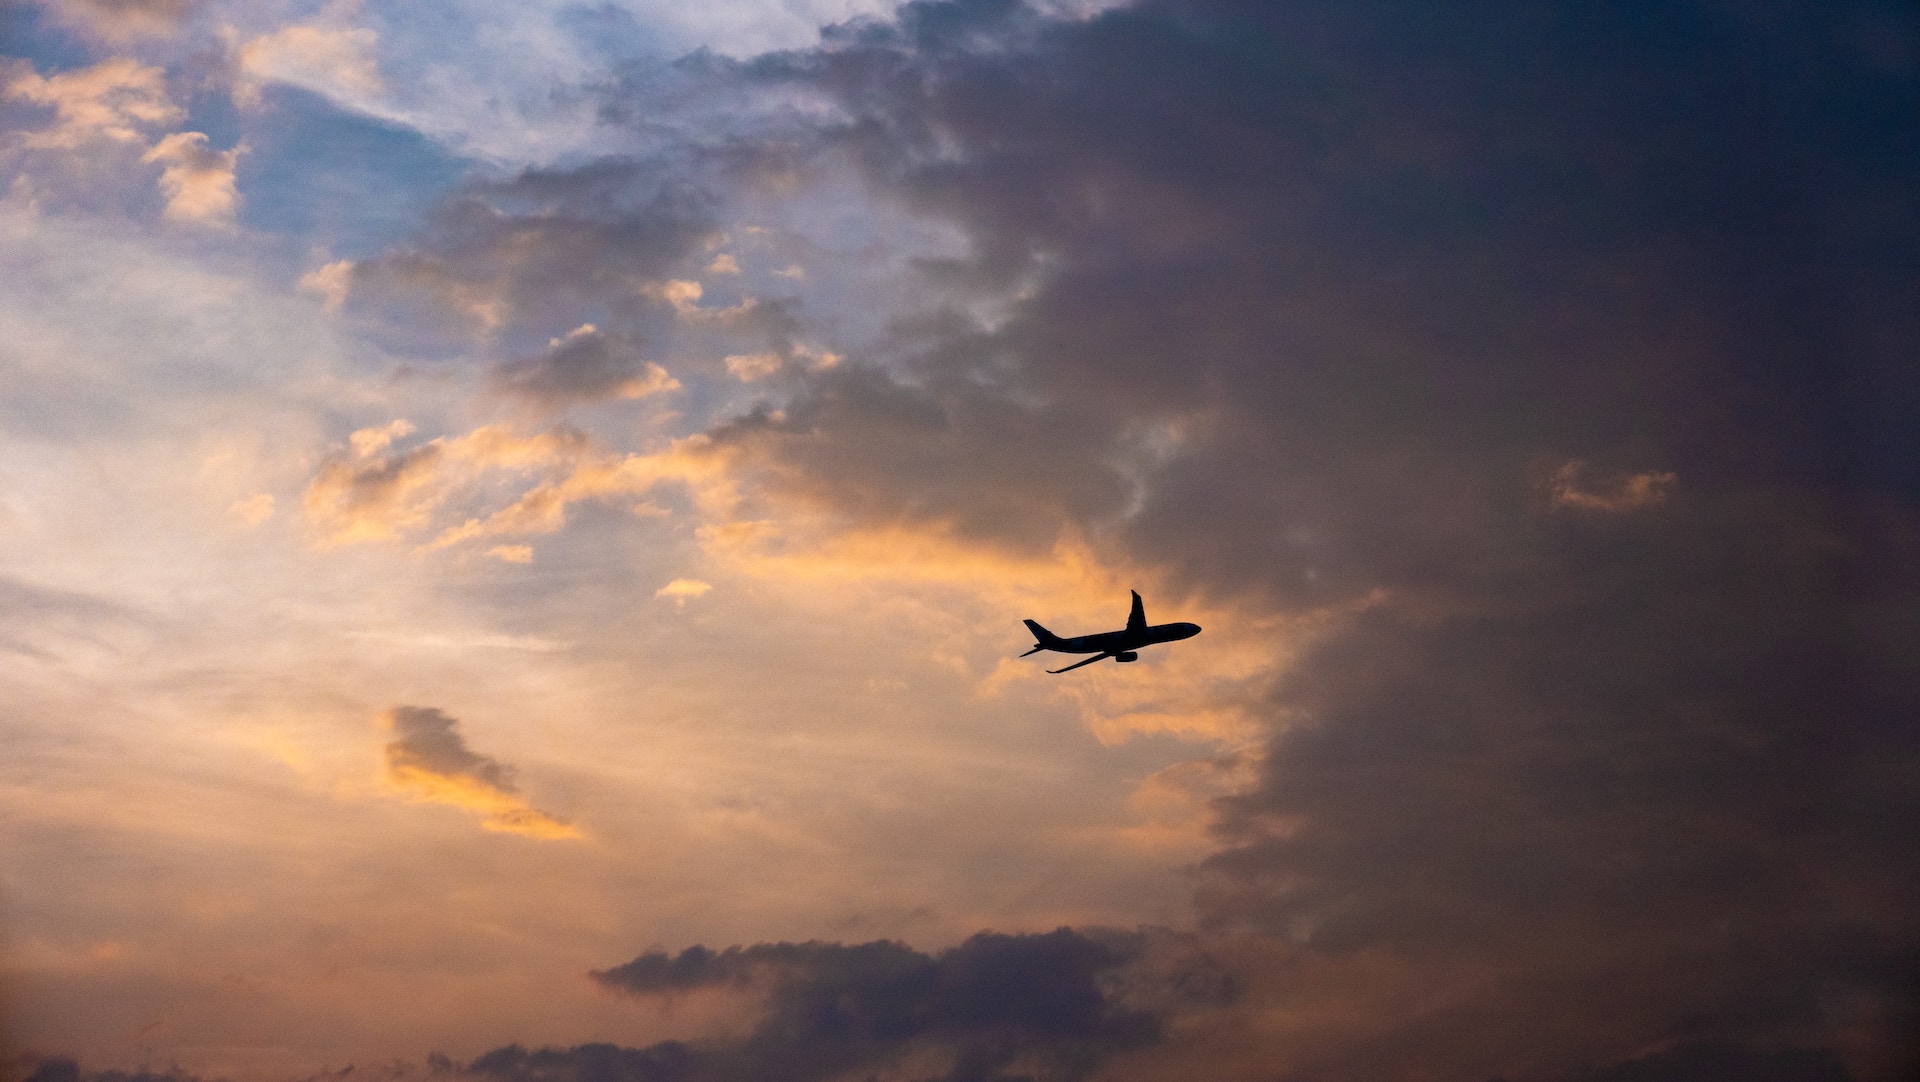 aeroplane flying through the sky with a sunset background